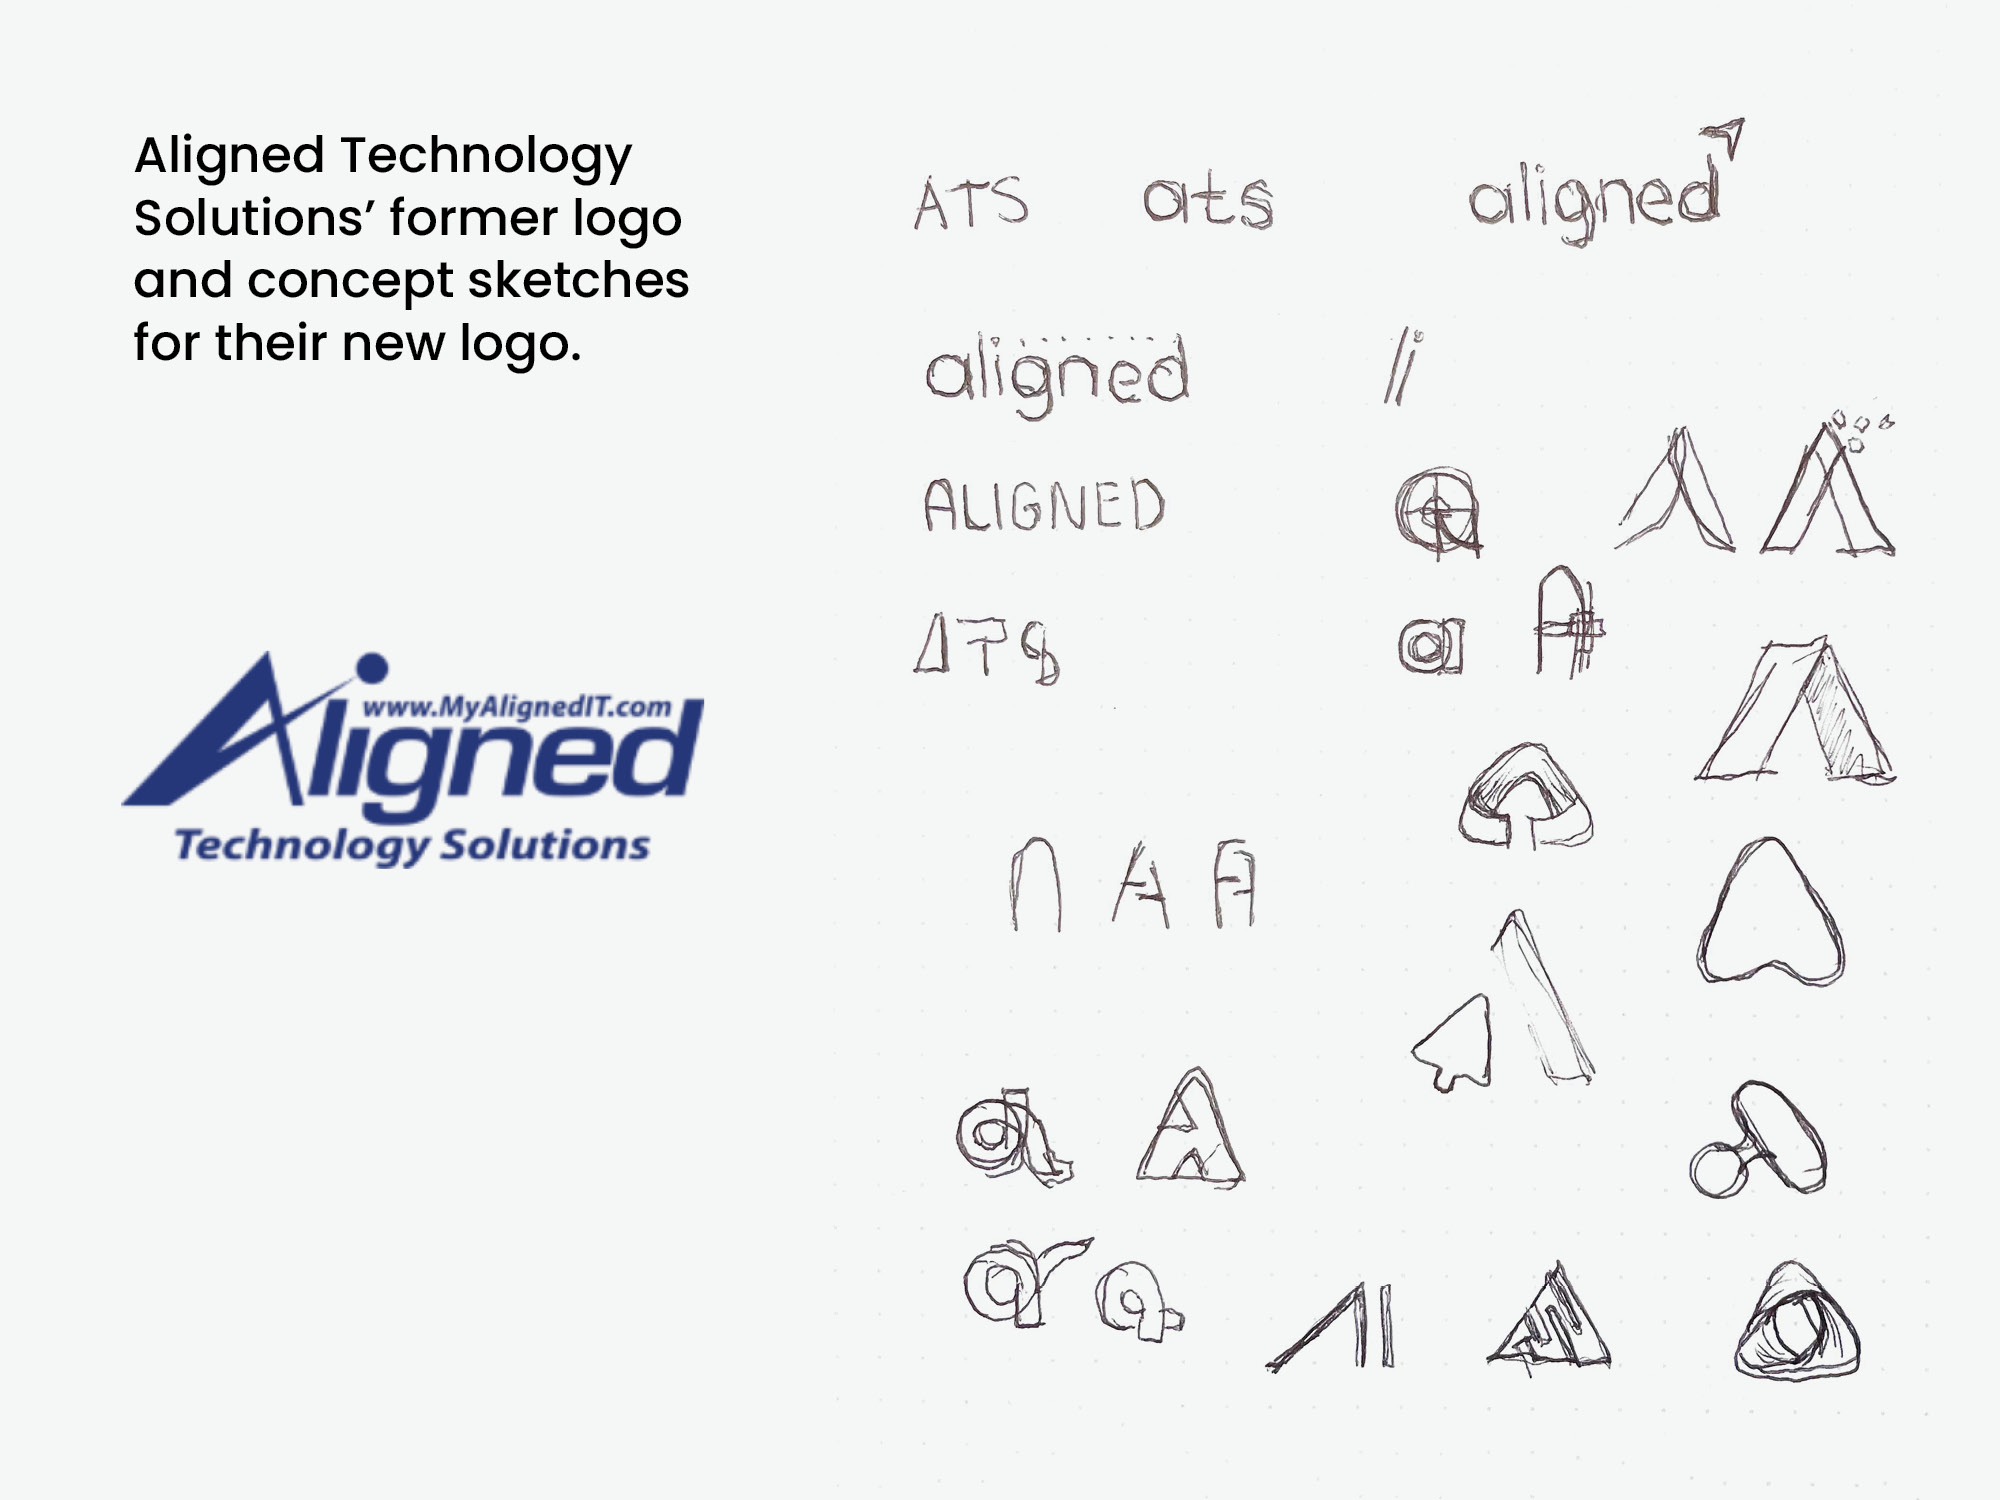 Aligned's former logo and concept sketches for their new logo.